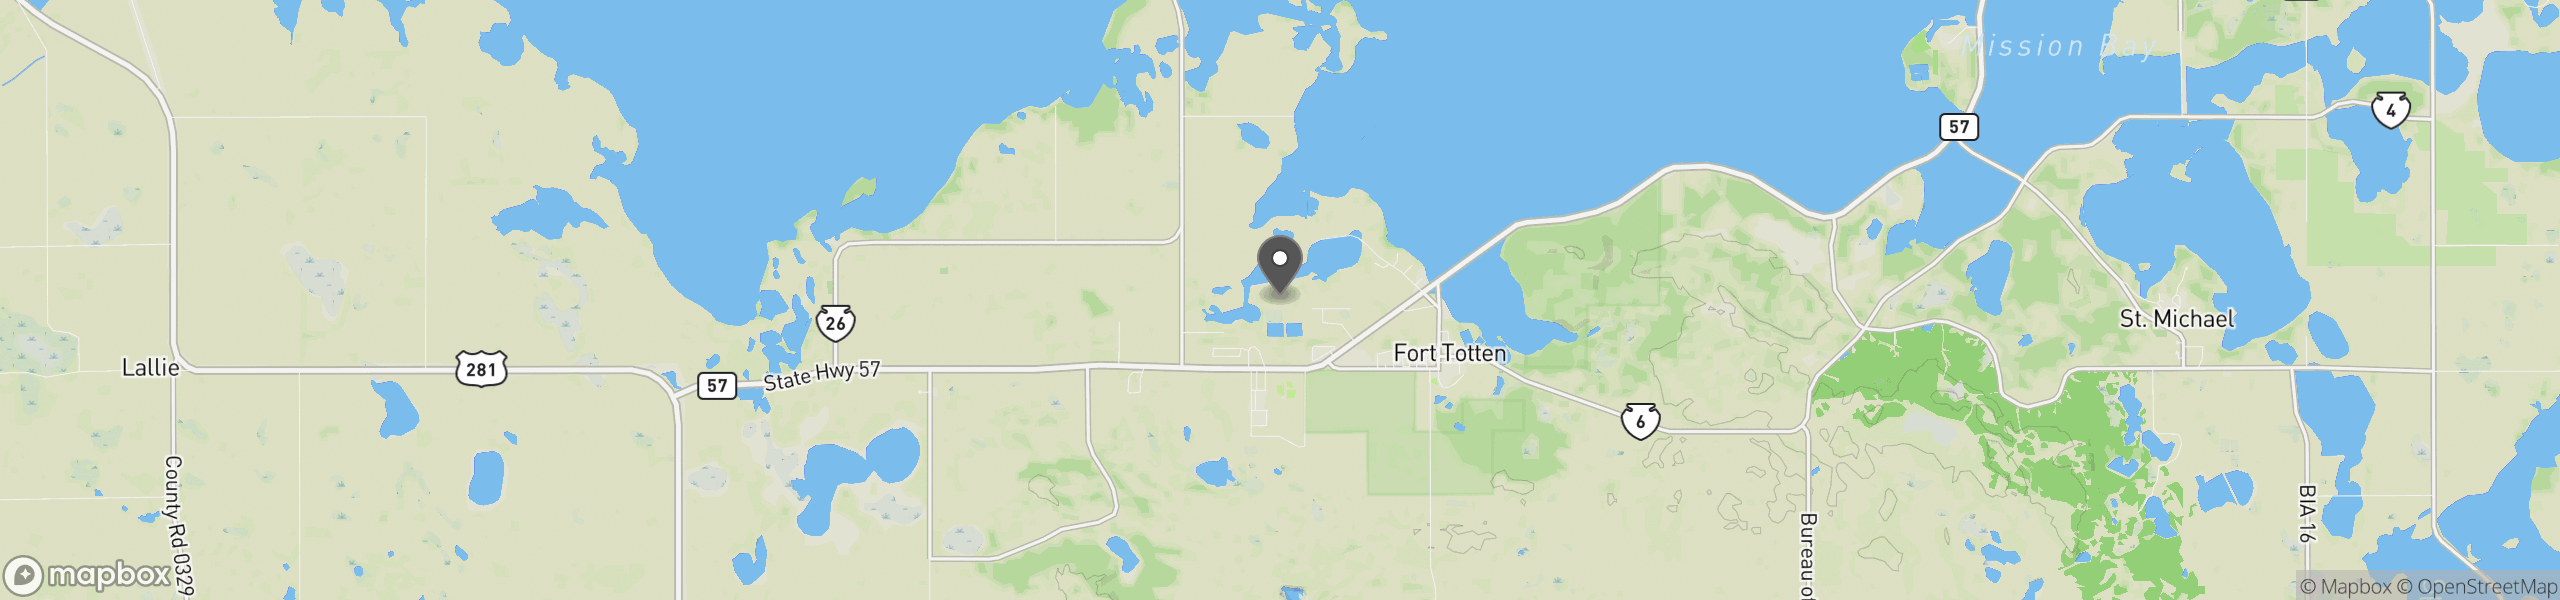 Fort Totten, ND 58335